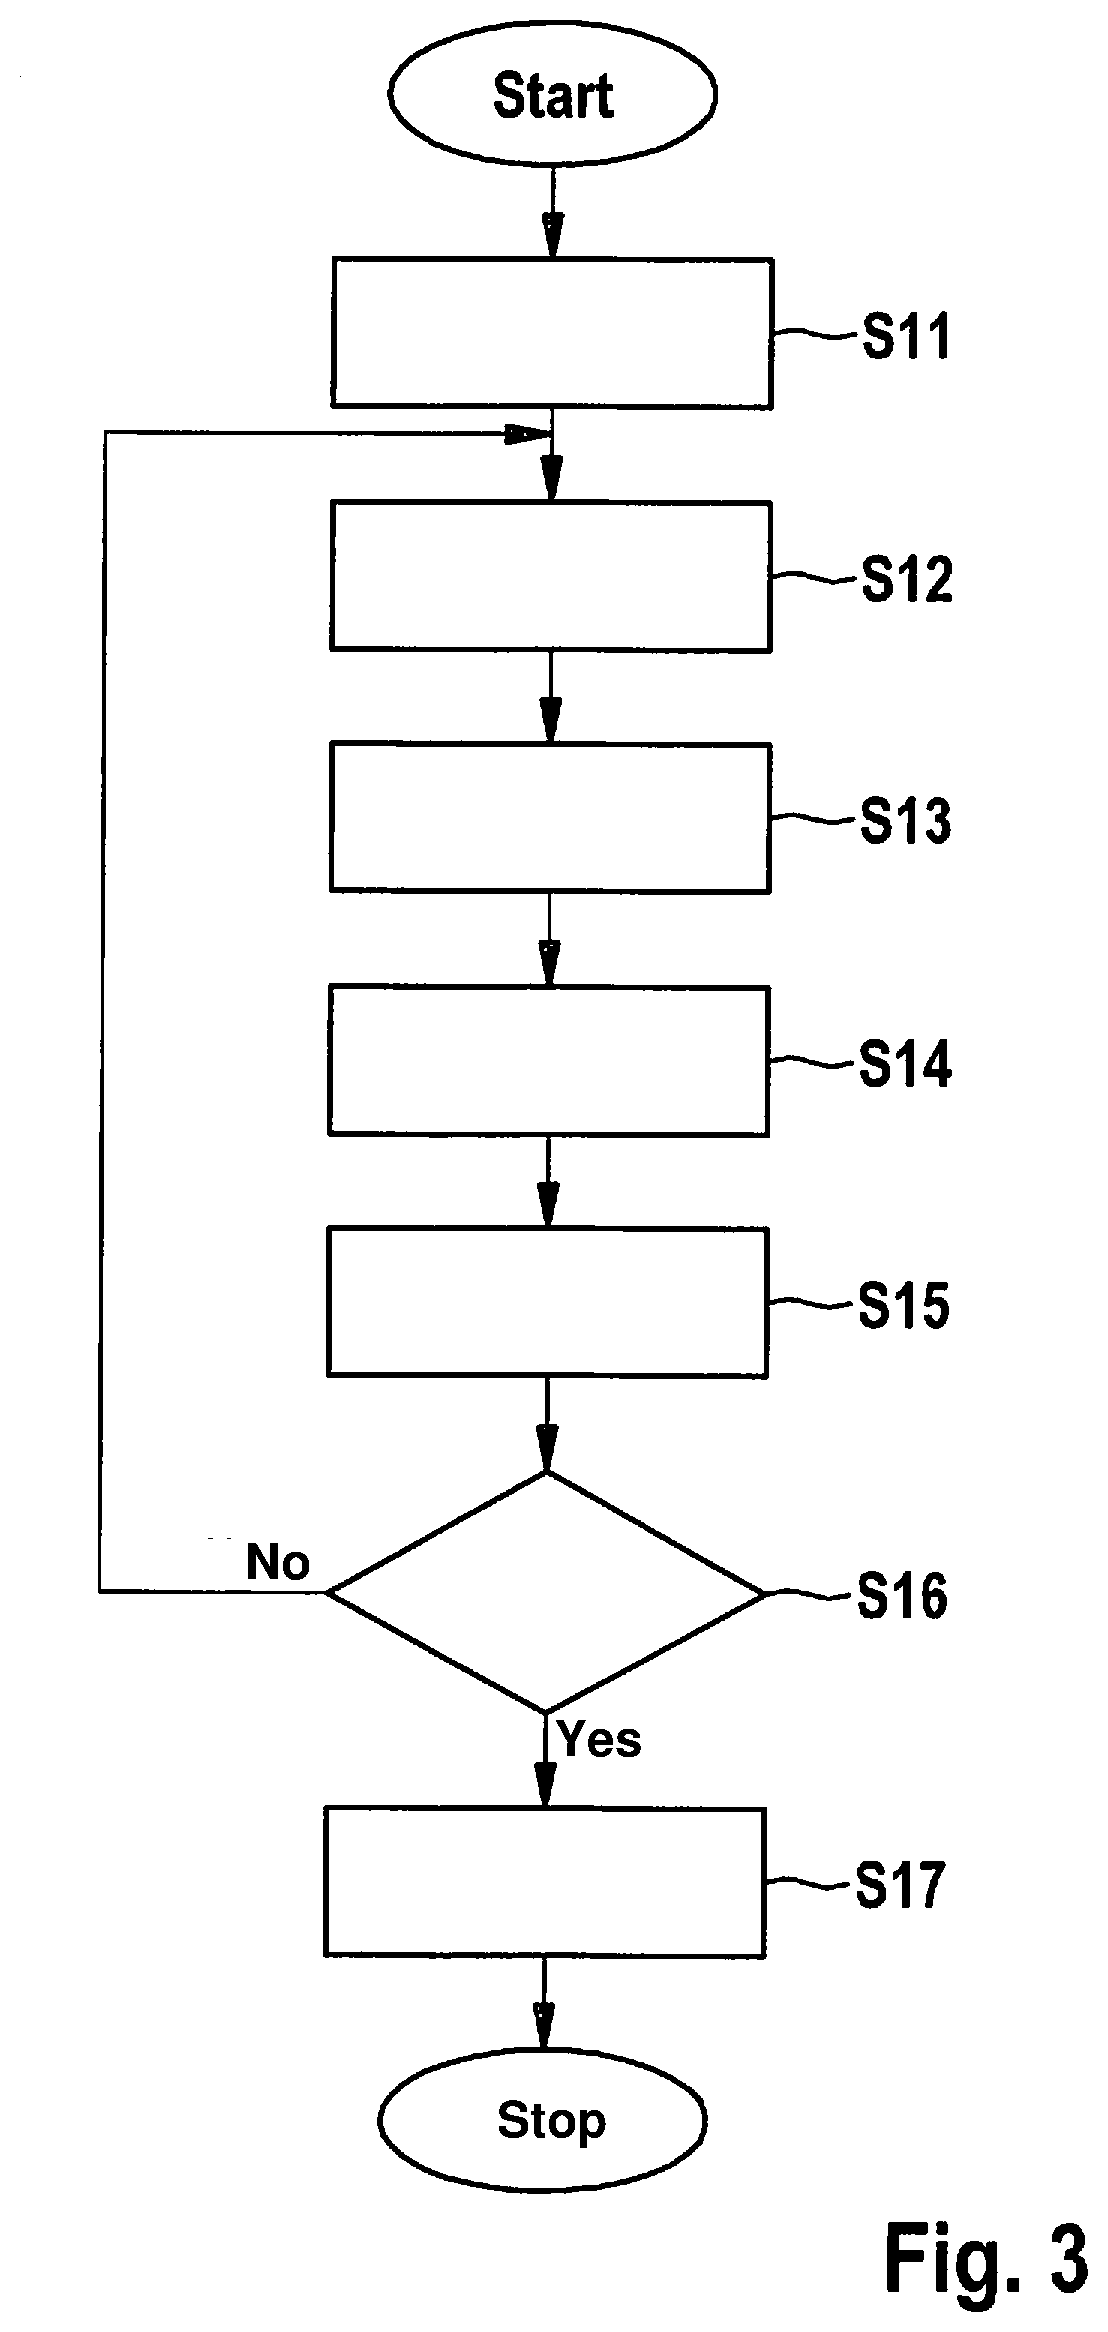 Method for trajectory planning of a movable object